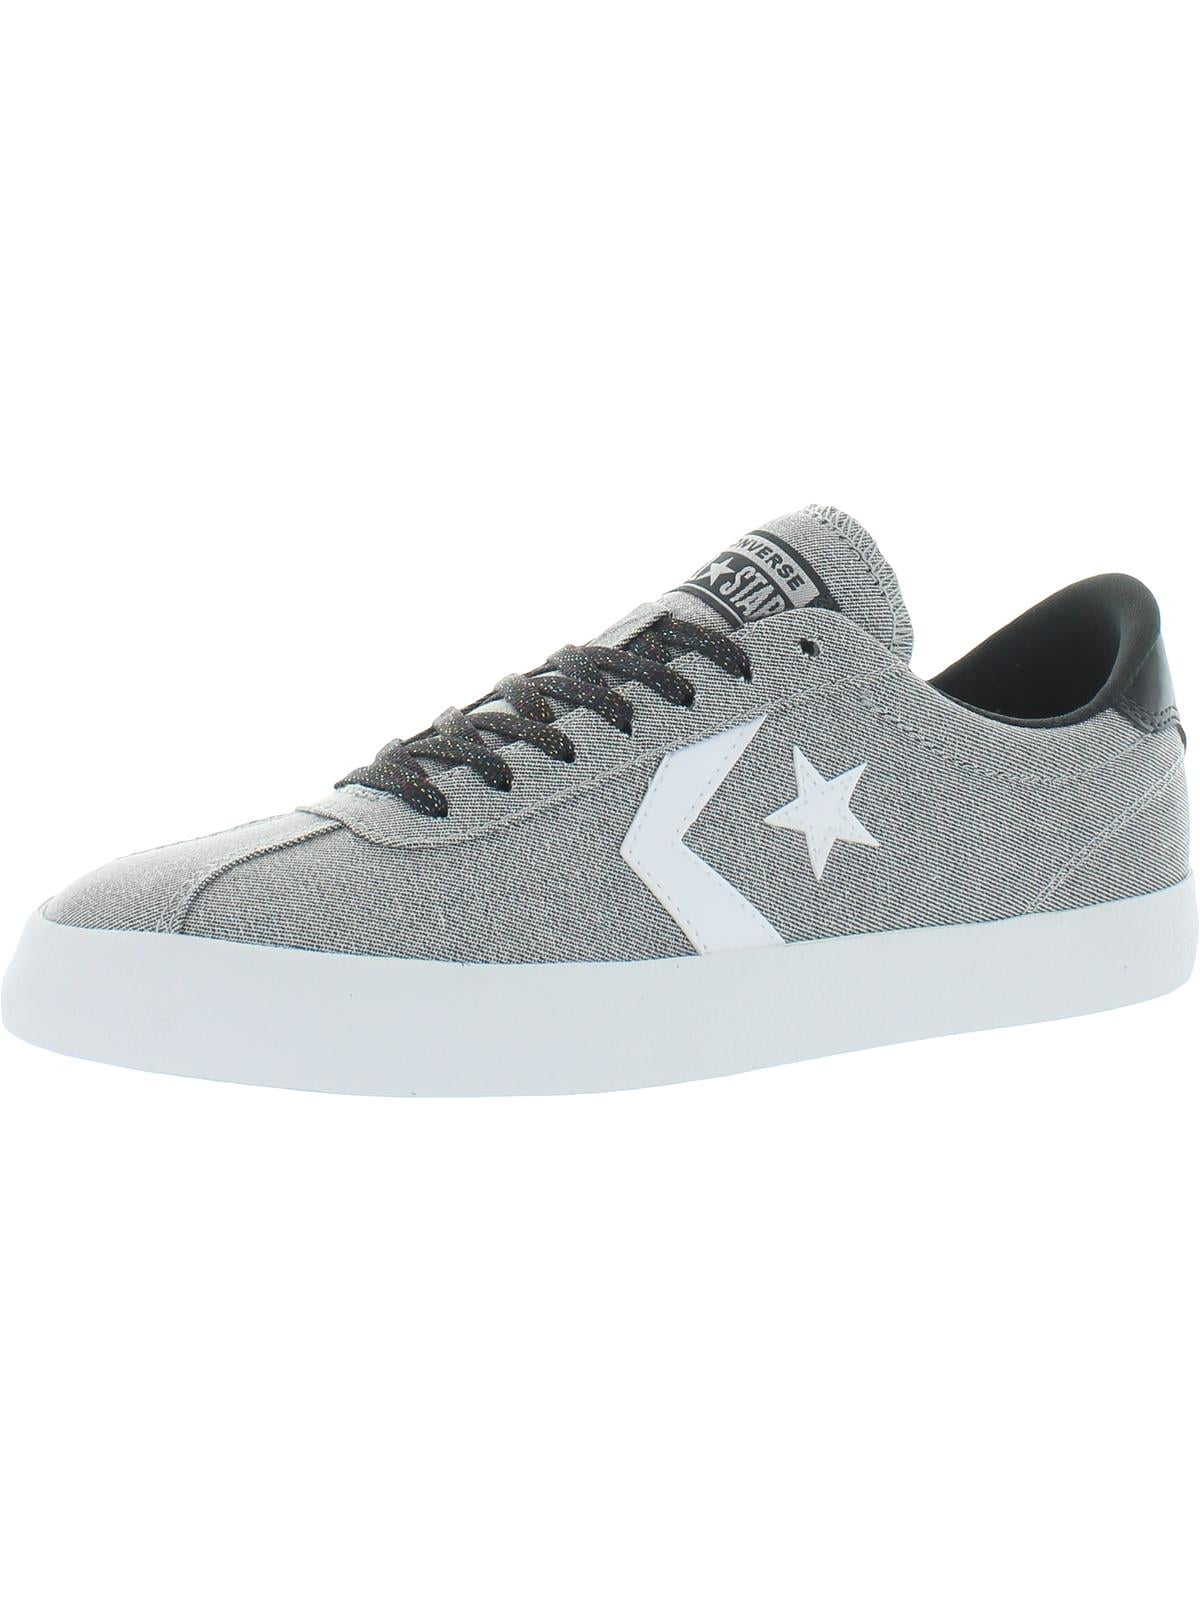 Converse Mens Breakpoint Ox Fitness Casual Fashion Sneakers 6.5 - Walmart.com